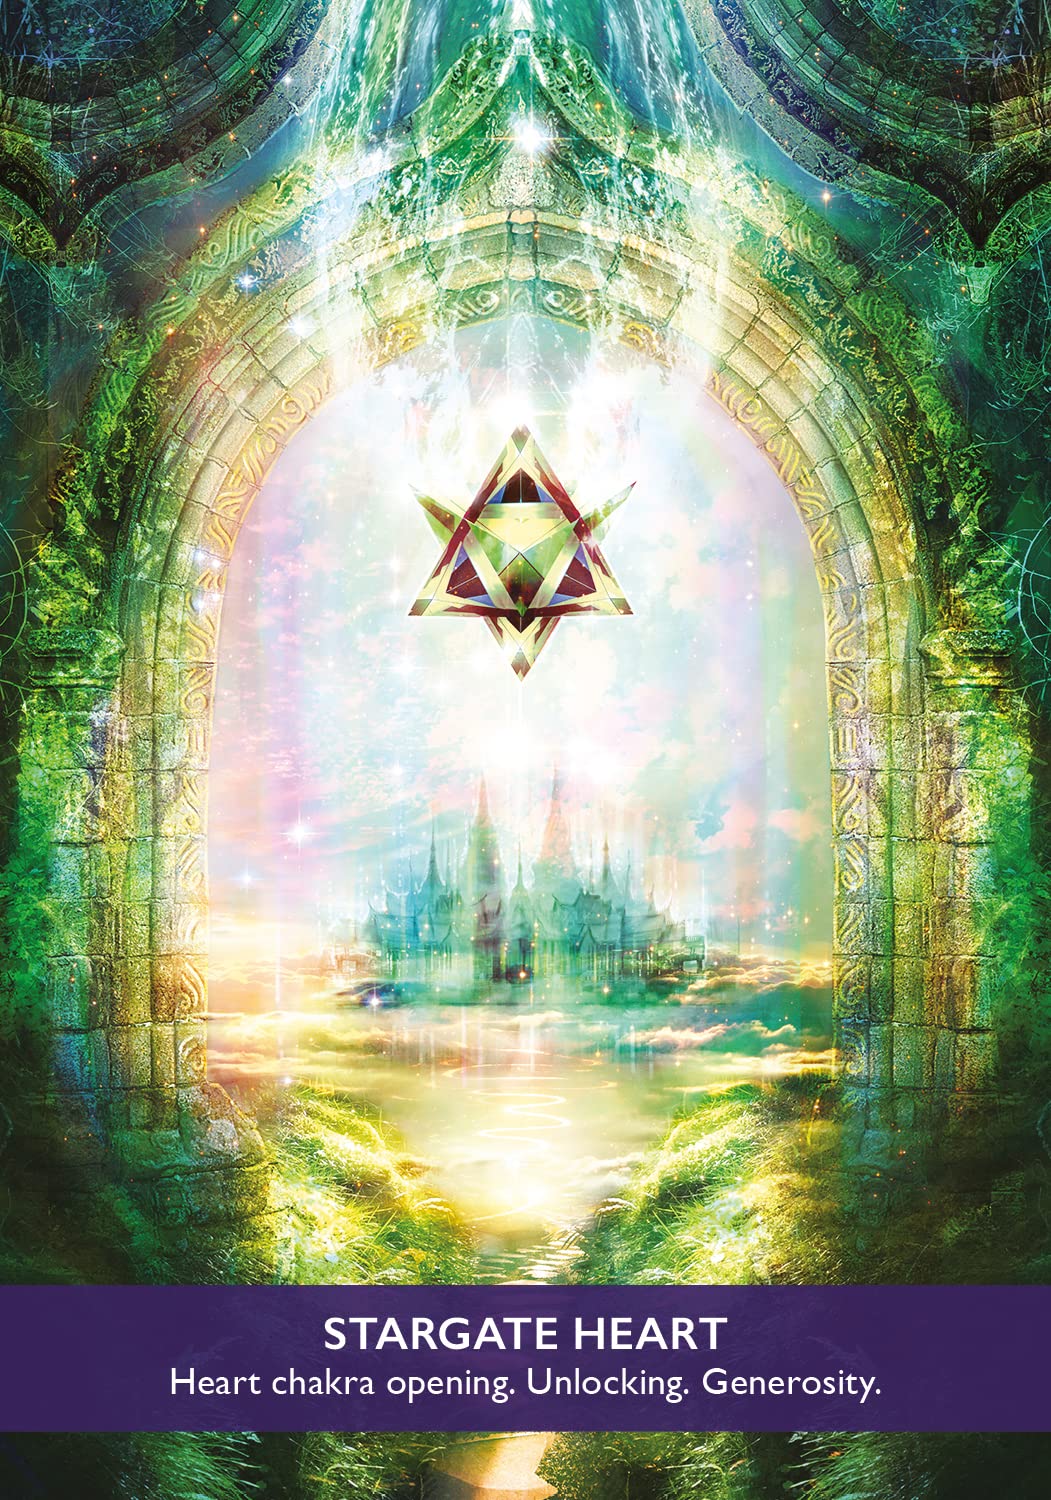 Gateway of Light Activation Oracle; Kyle Gray